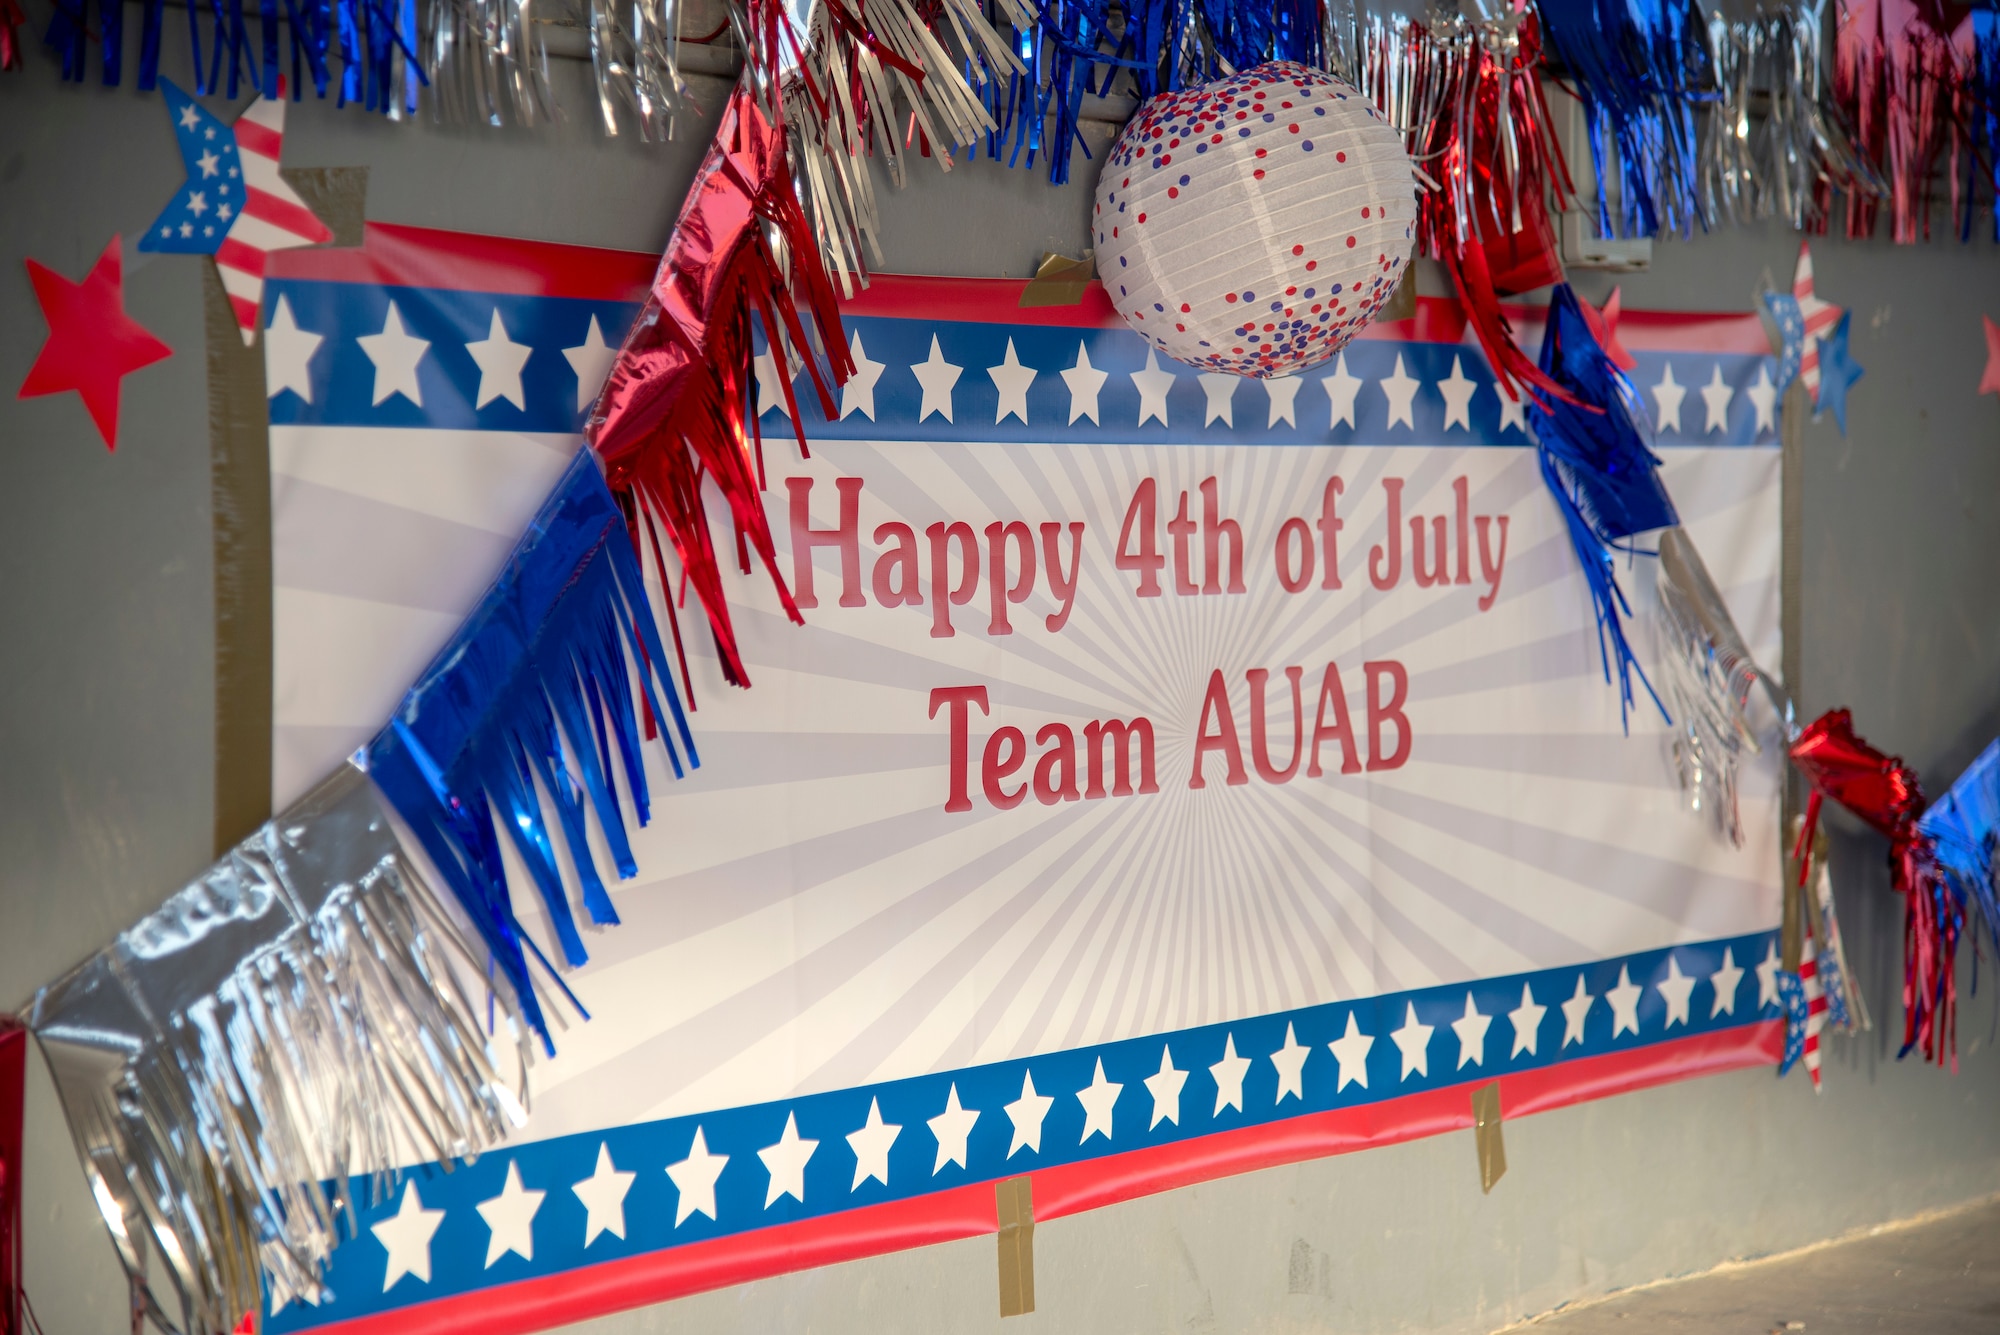 A celebratory sign stands decorated at Memorial Plaza where people gathered to enjoy free music, food and company, July 4, 2020, Al Udeid Air Base, Qatar. Members of the 379th Expeditionary Force Support Squadron put together multiple events for their 4th of July celebration on Independence Day following strict Center for Disease Control guidance.